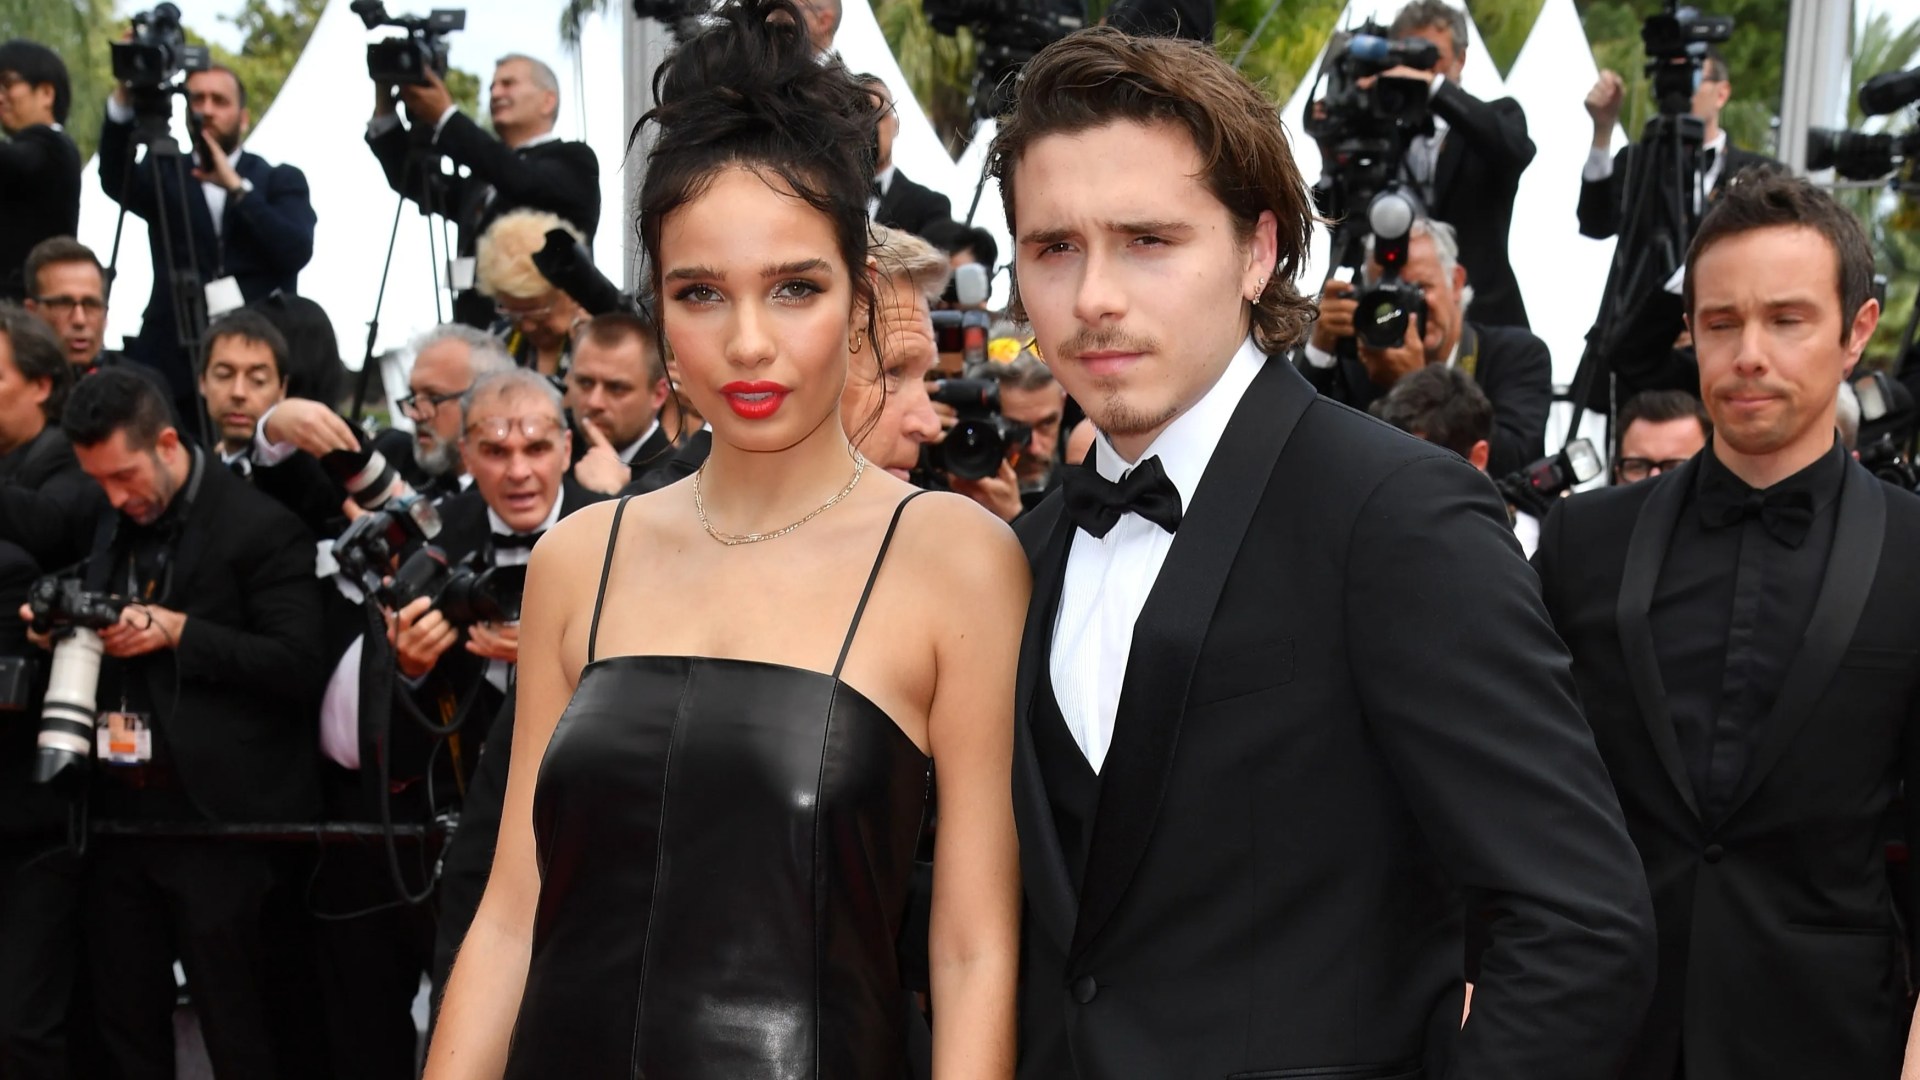 Brooklyn Beckham’s Ex Hana Cross Moves On to Date Sister-in-Law’s Older Brother – Juicy Celebrity Love Triangle Revealed!